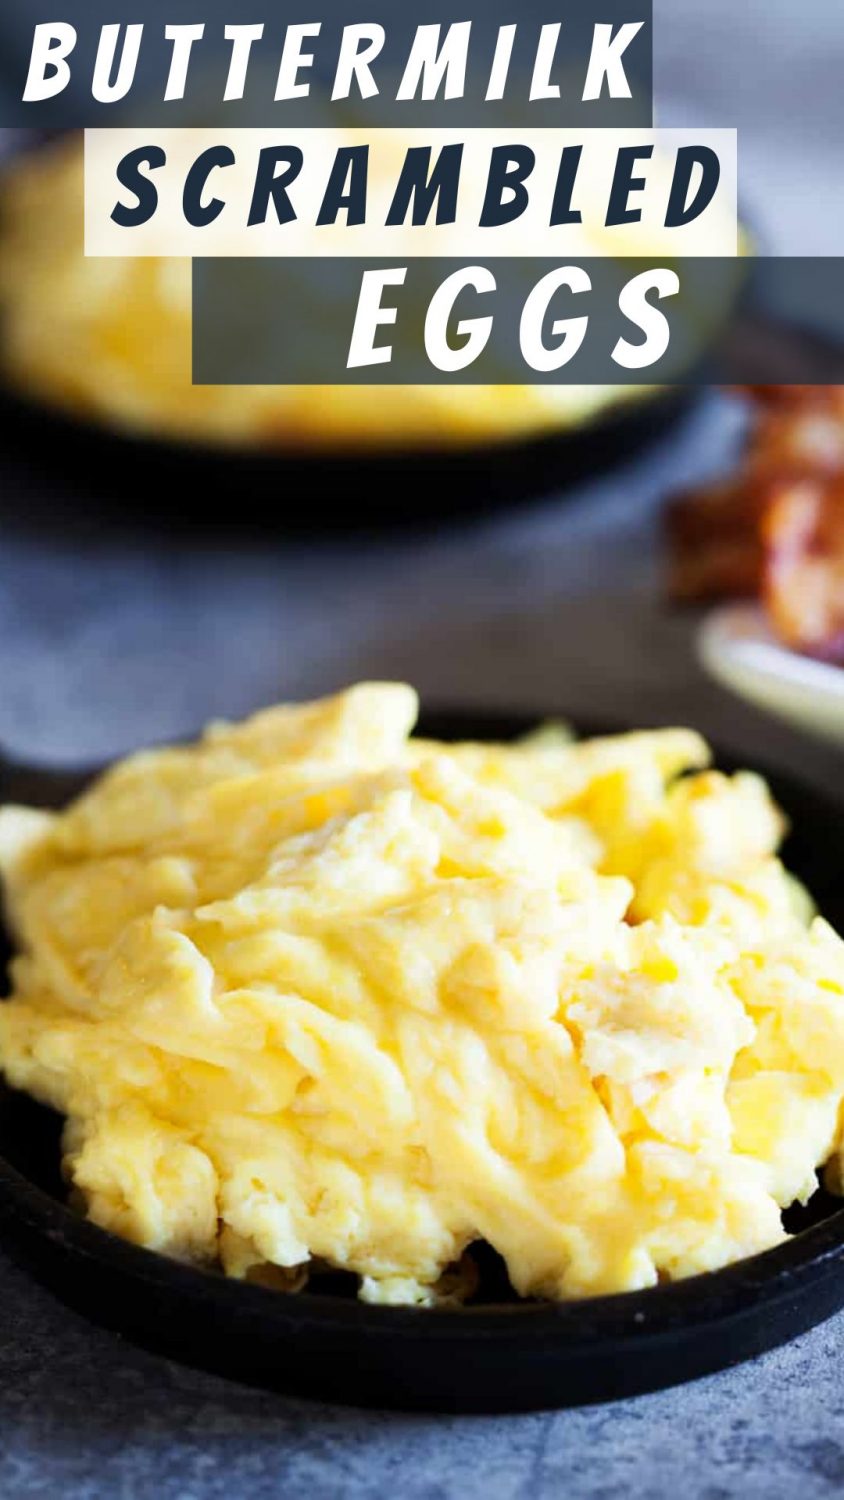 Whisked Wonders of Country Buttermilk Scrambled Eggs